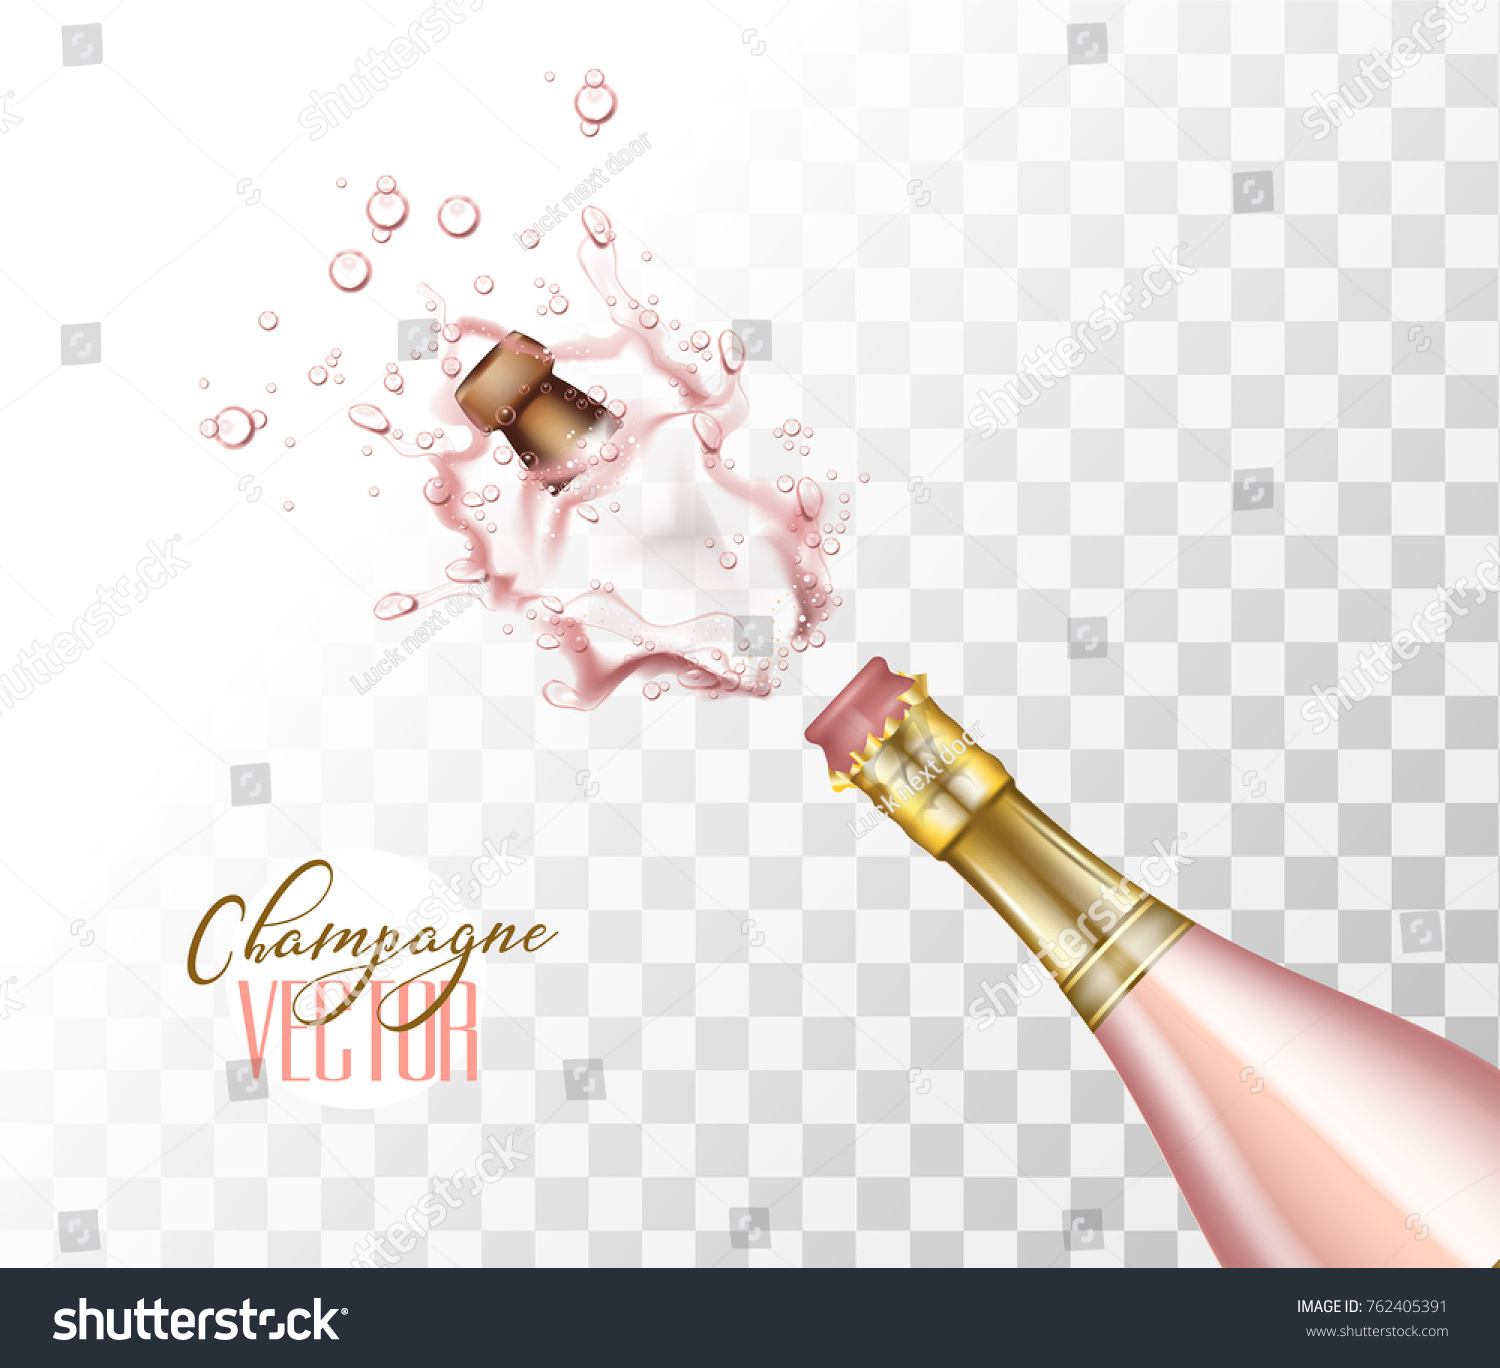 Download Realistic Pink Champagne Explosion Photo Realistic Stock Vector Royalty Free 762405391 Yellowimages Mockups